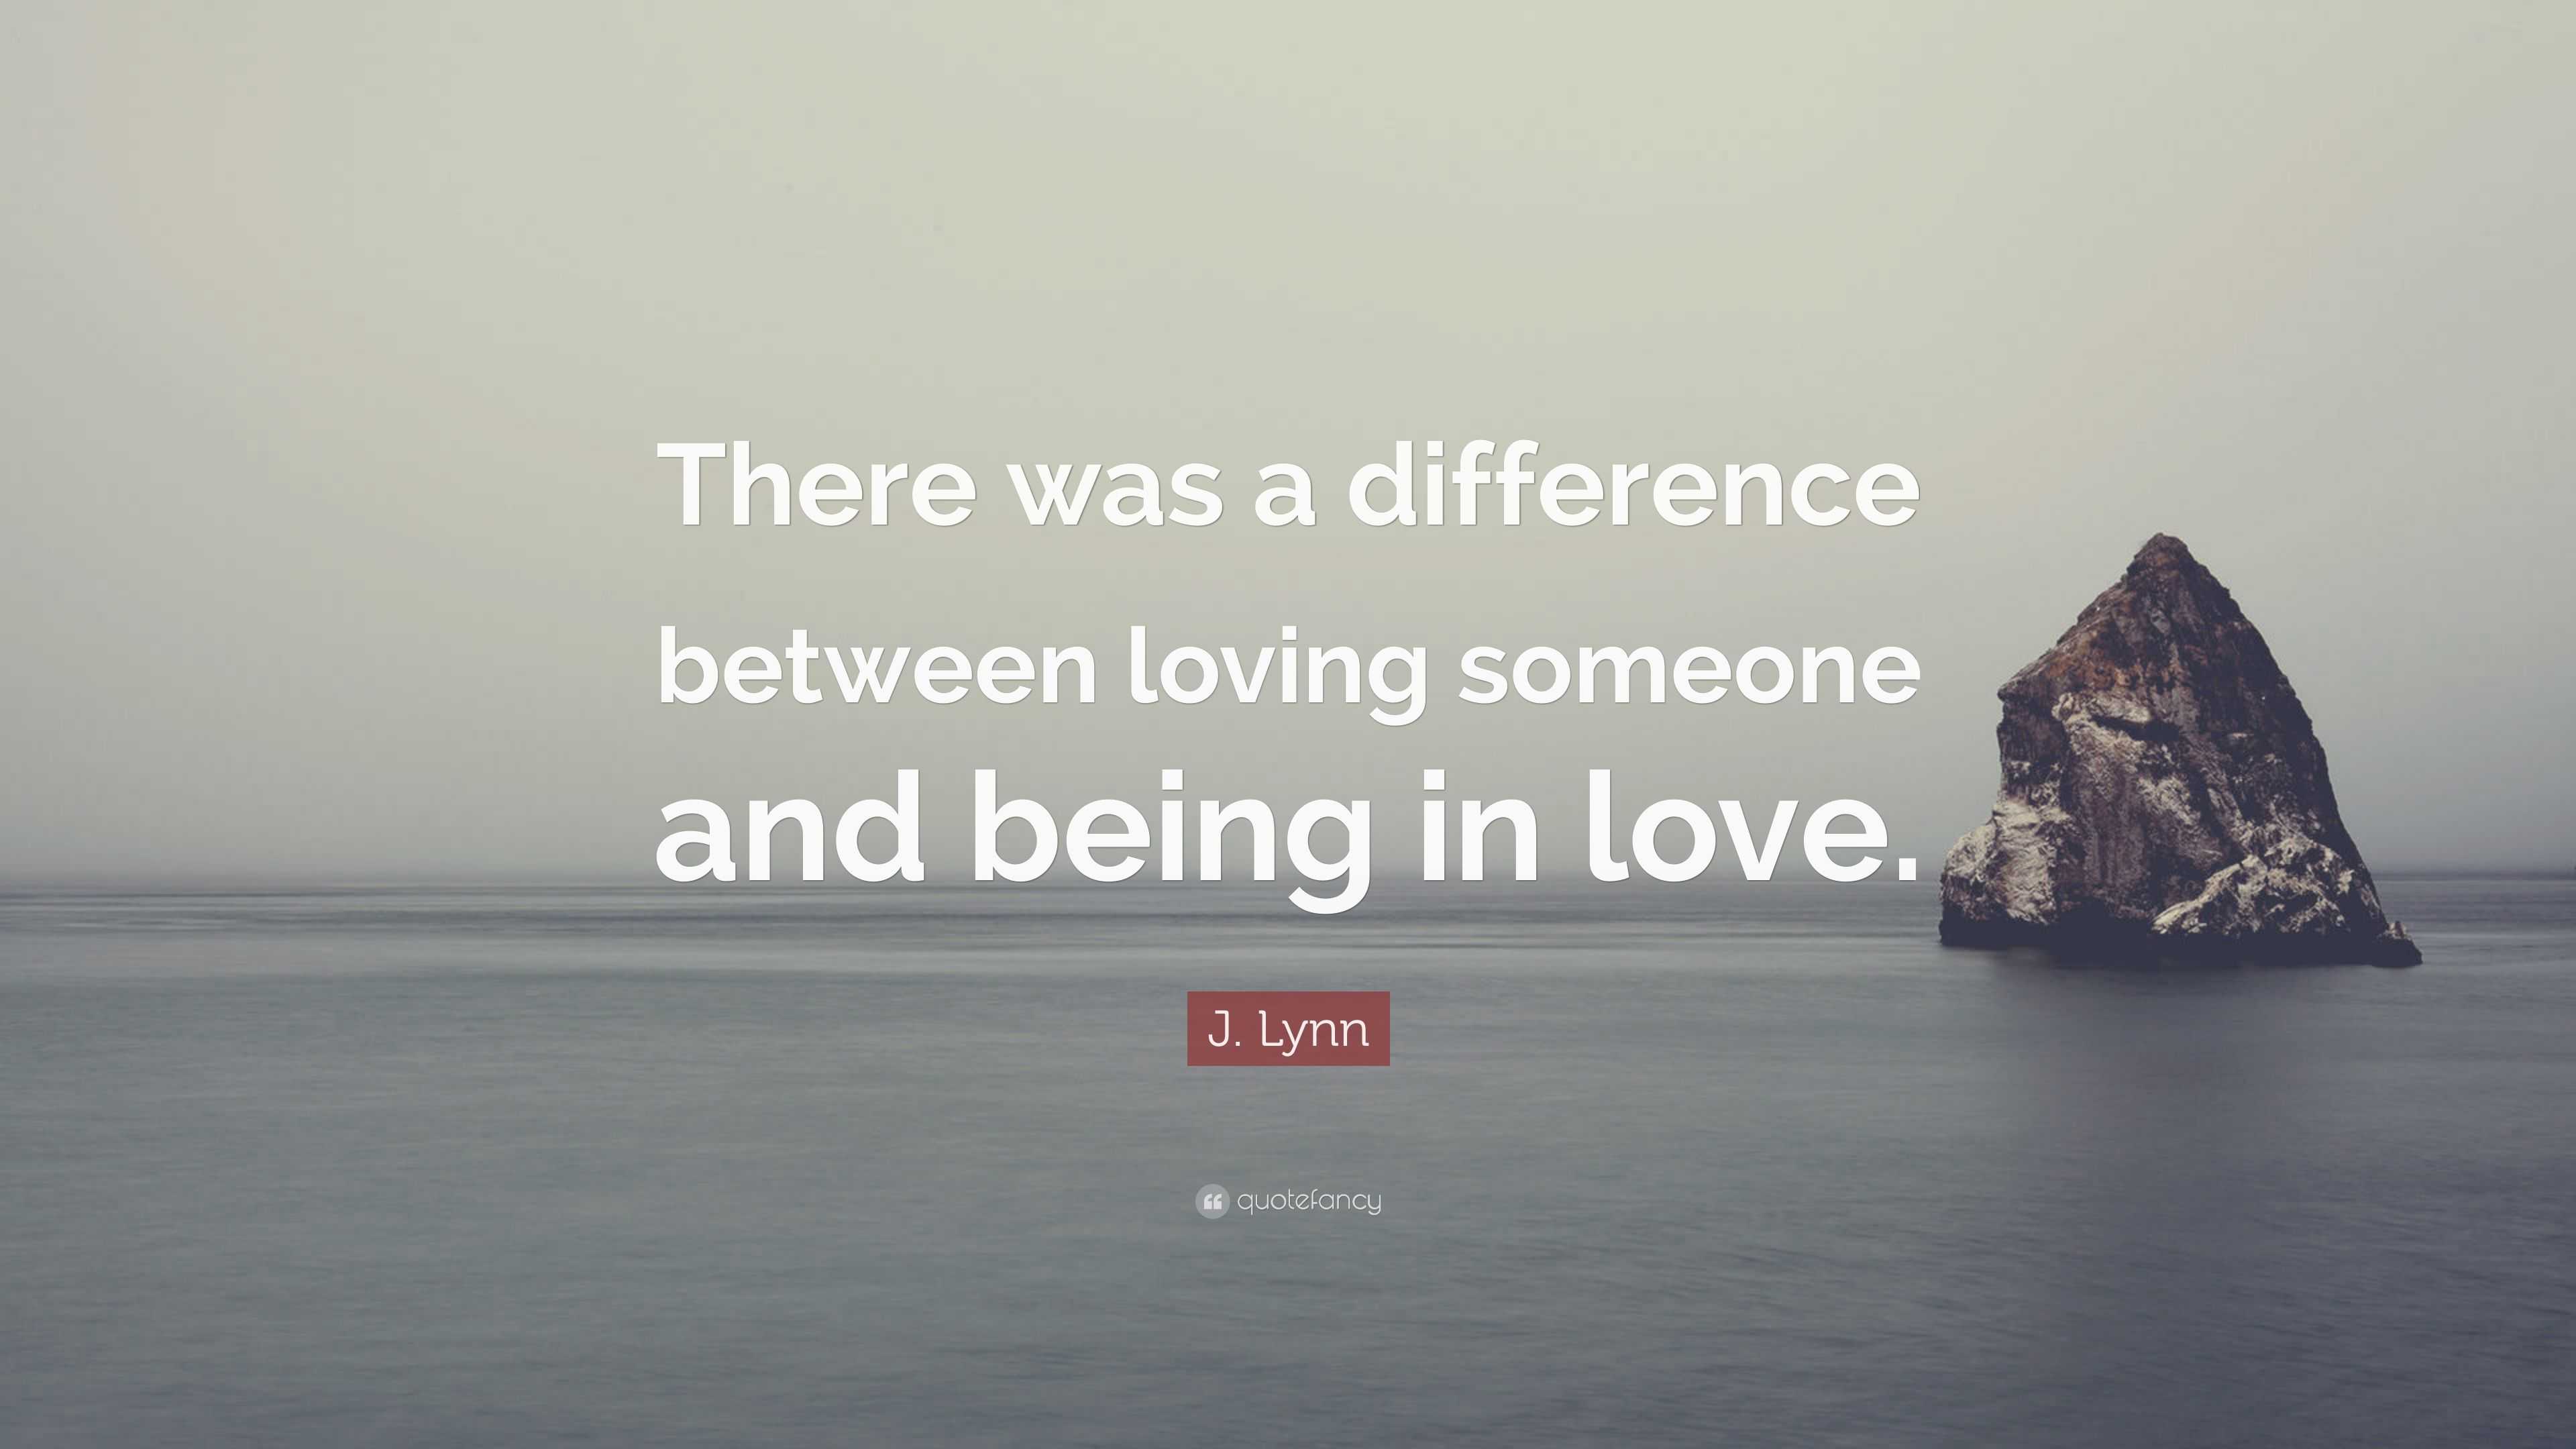 J Lynn Quote “There was a difference between loving someone and being in